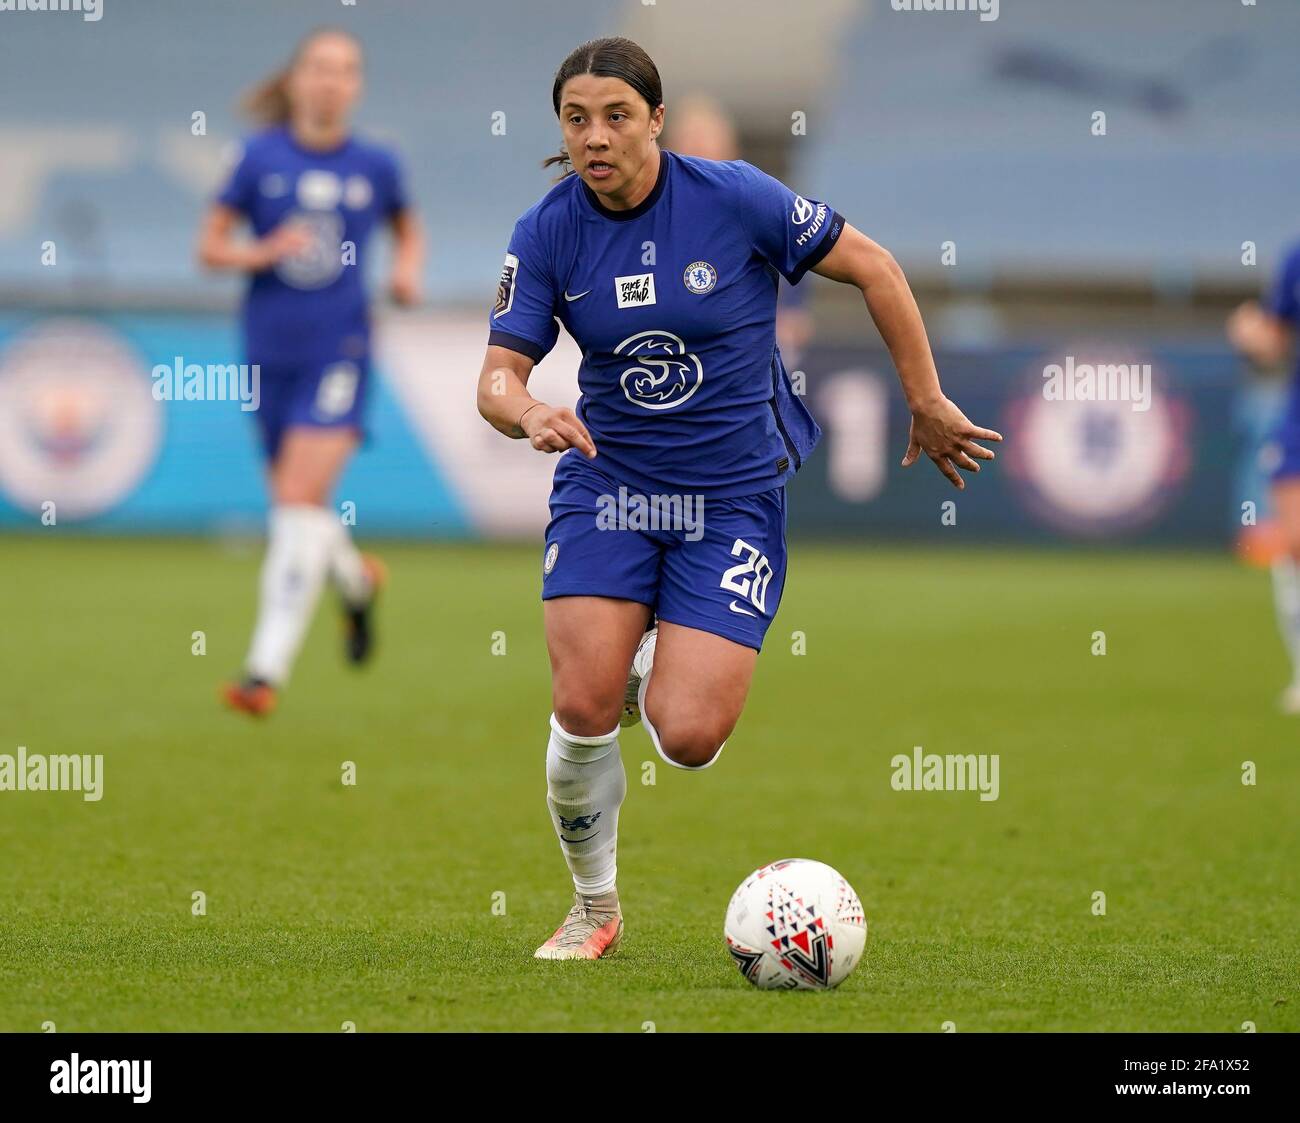 Manchester, England, 21st April 2021. Sam Kerr of Chelsea during the The FA WomenÕs Super League match at the Academy Stadium, Manchester. Picture credit should read: Andrew Yates / Sportimage Credit: Sportimage/Alamy Live News Stock Photo